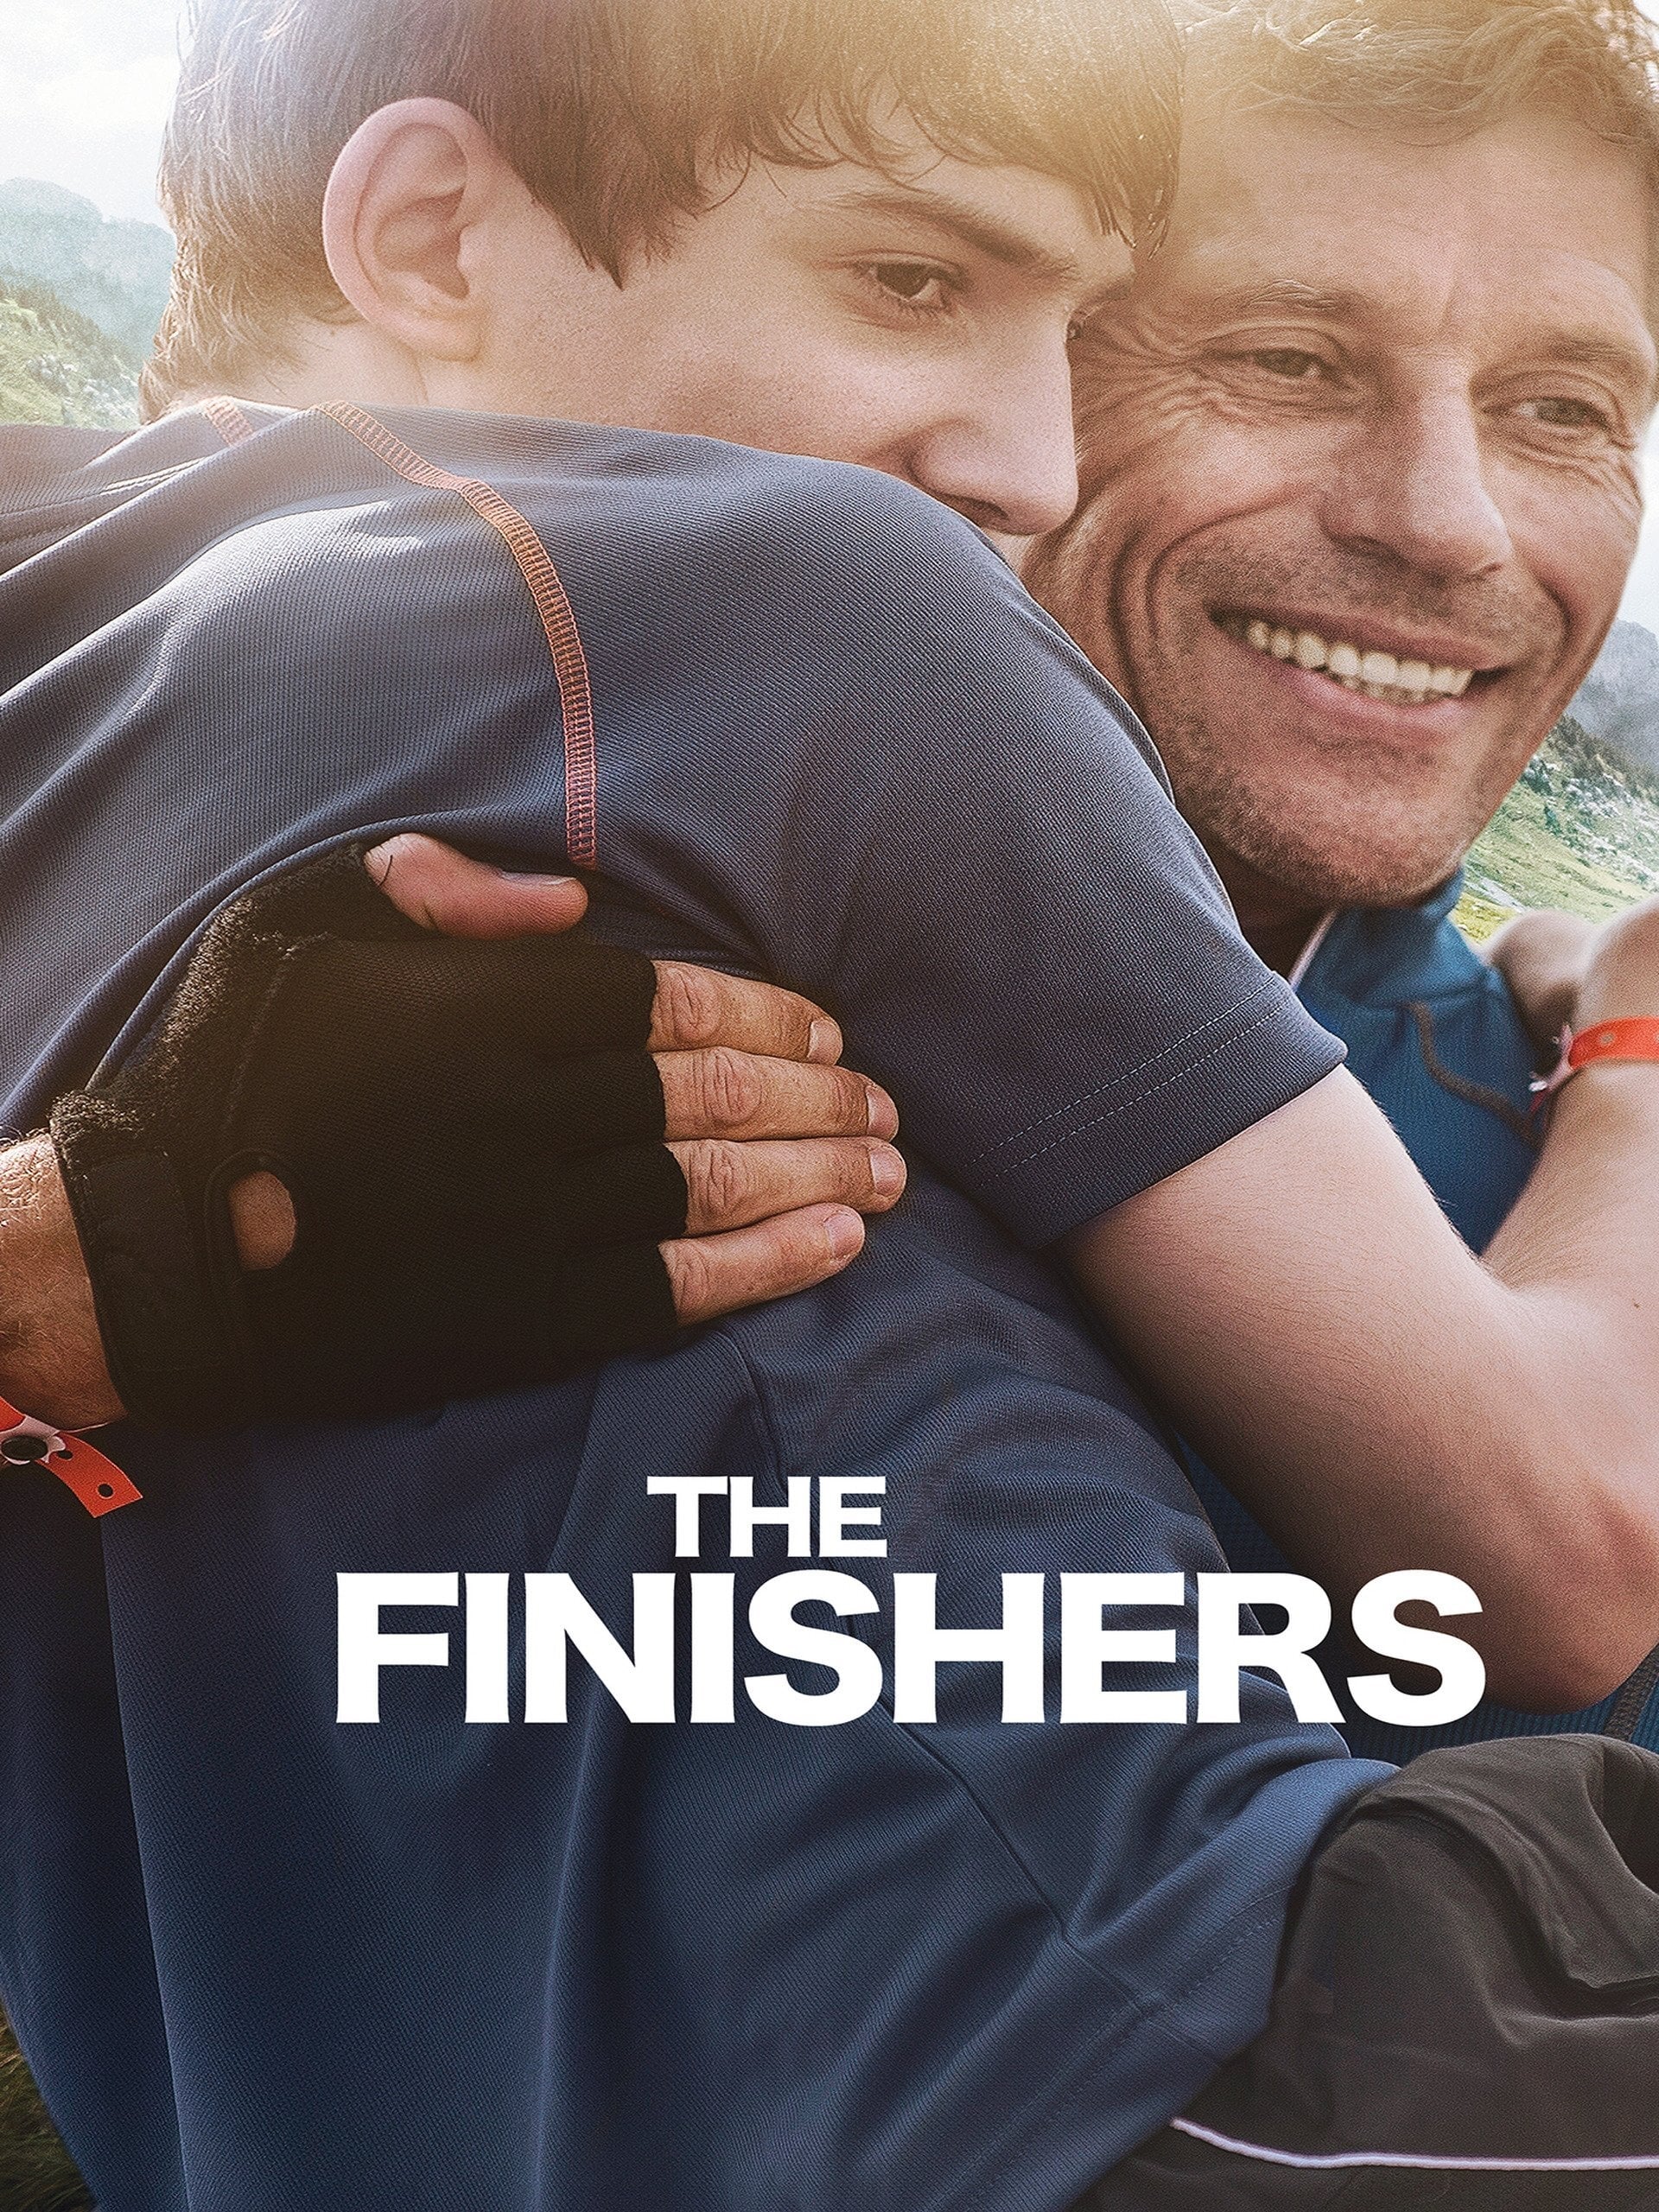 The Finishers (2013)